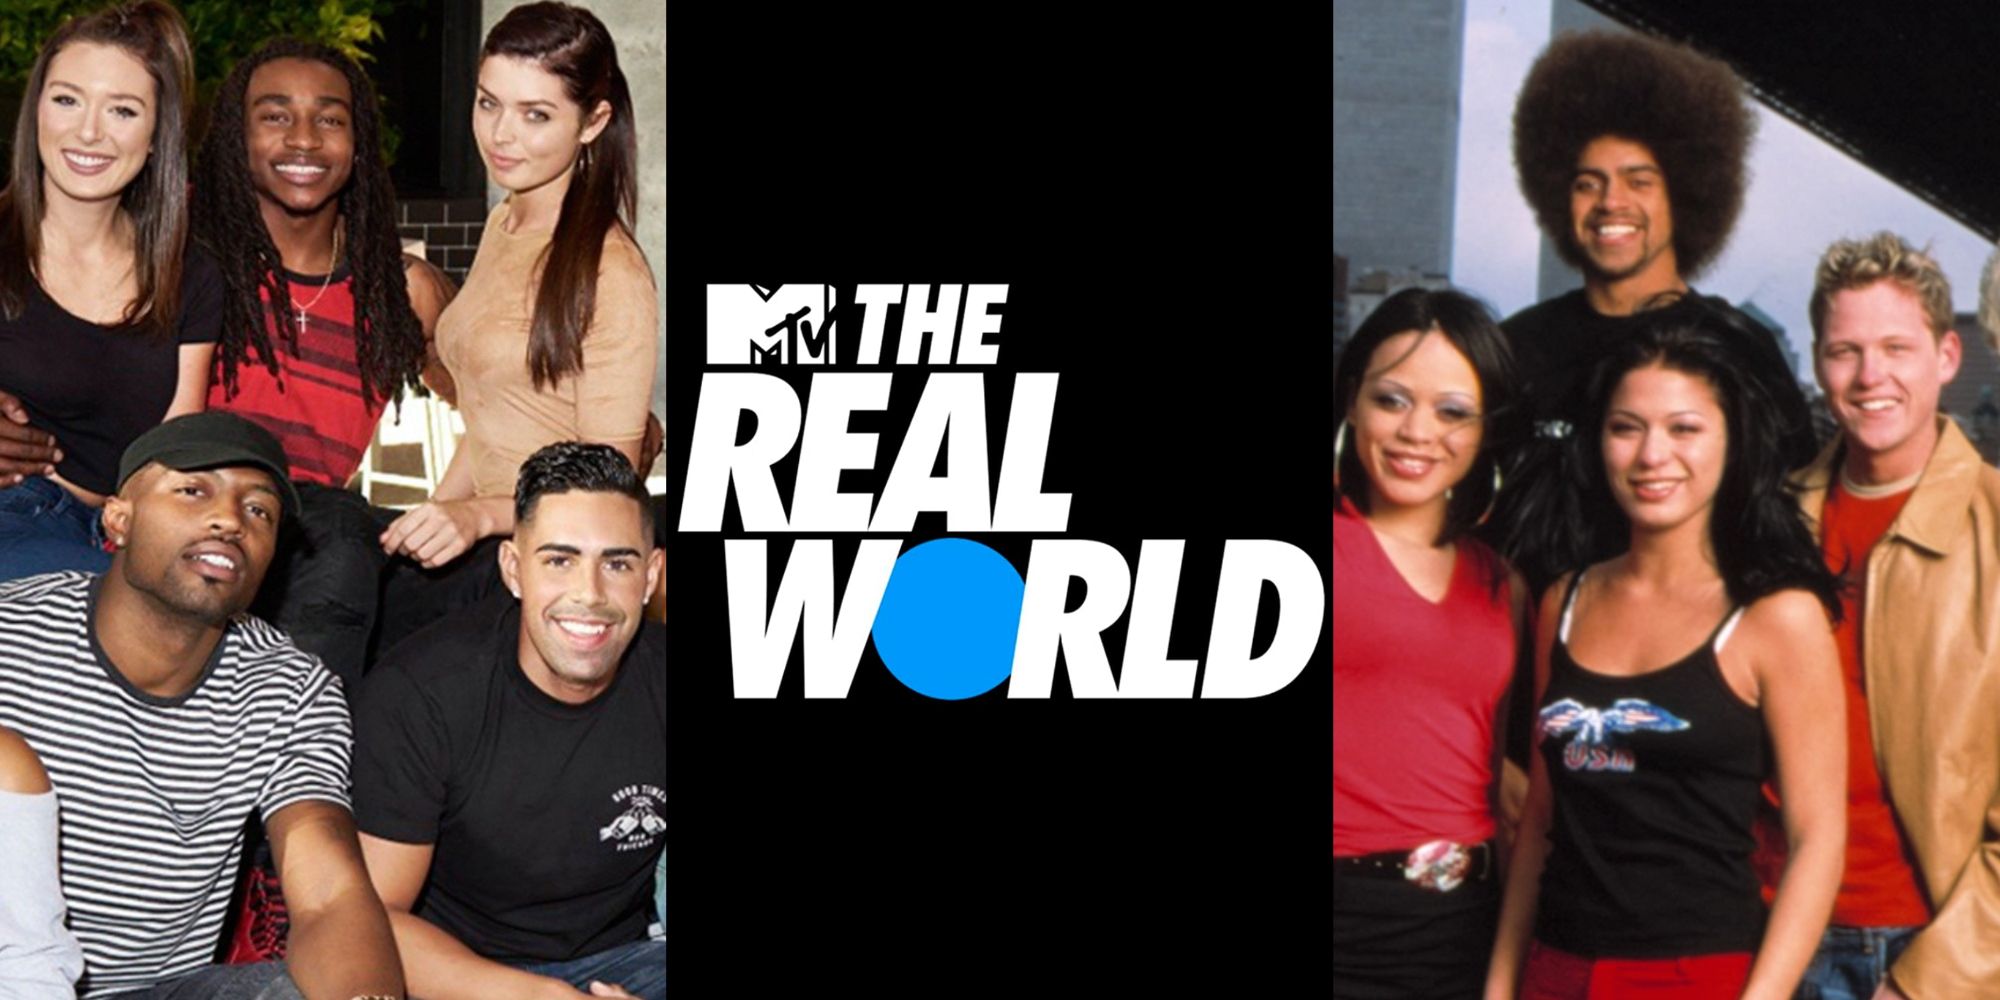 Split image of contestants from and the logo of The Real World feature